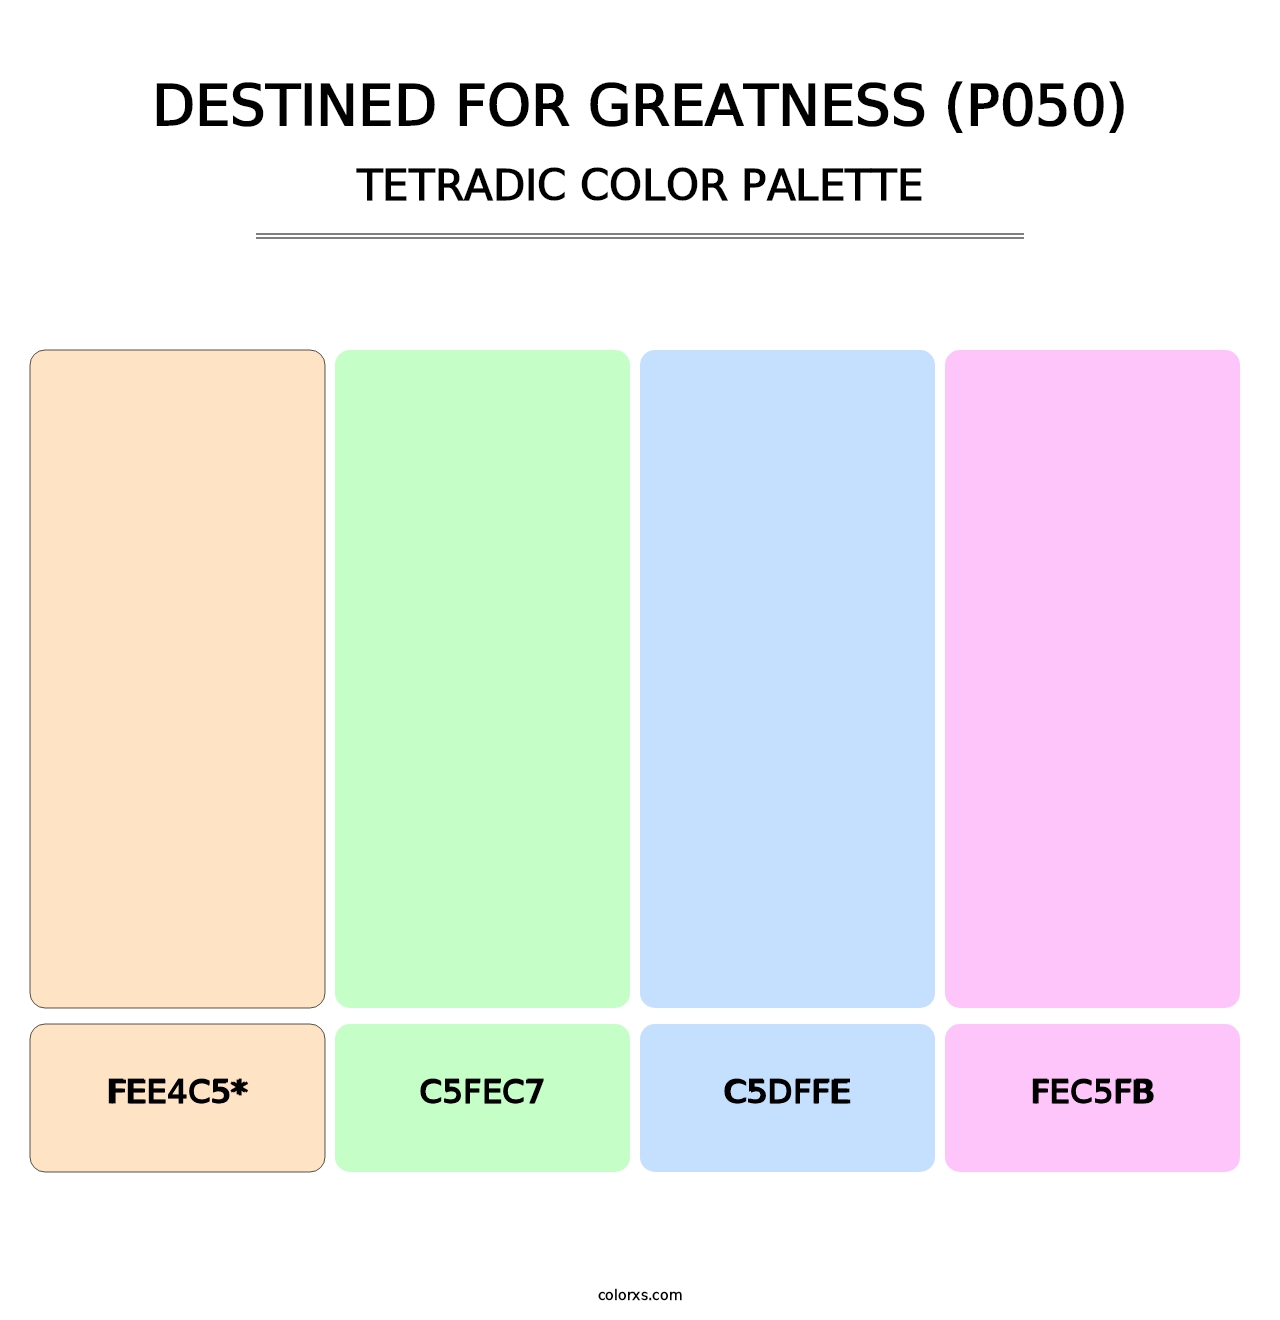 Destined for Greatness (P050) - Tetradic Color Palette